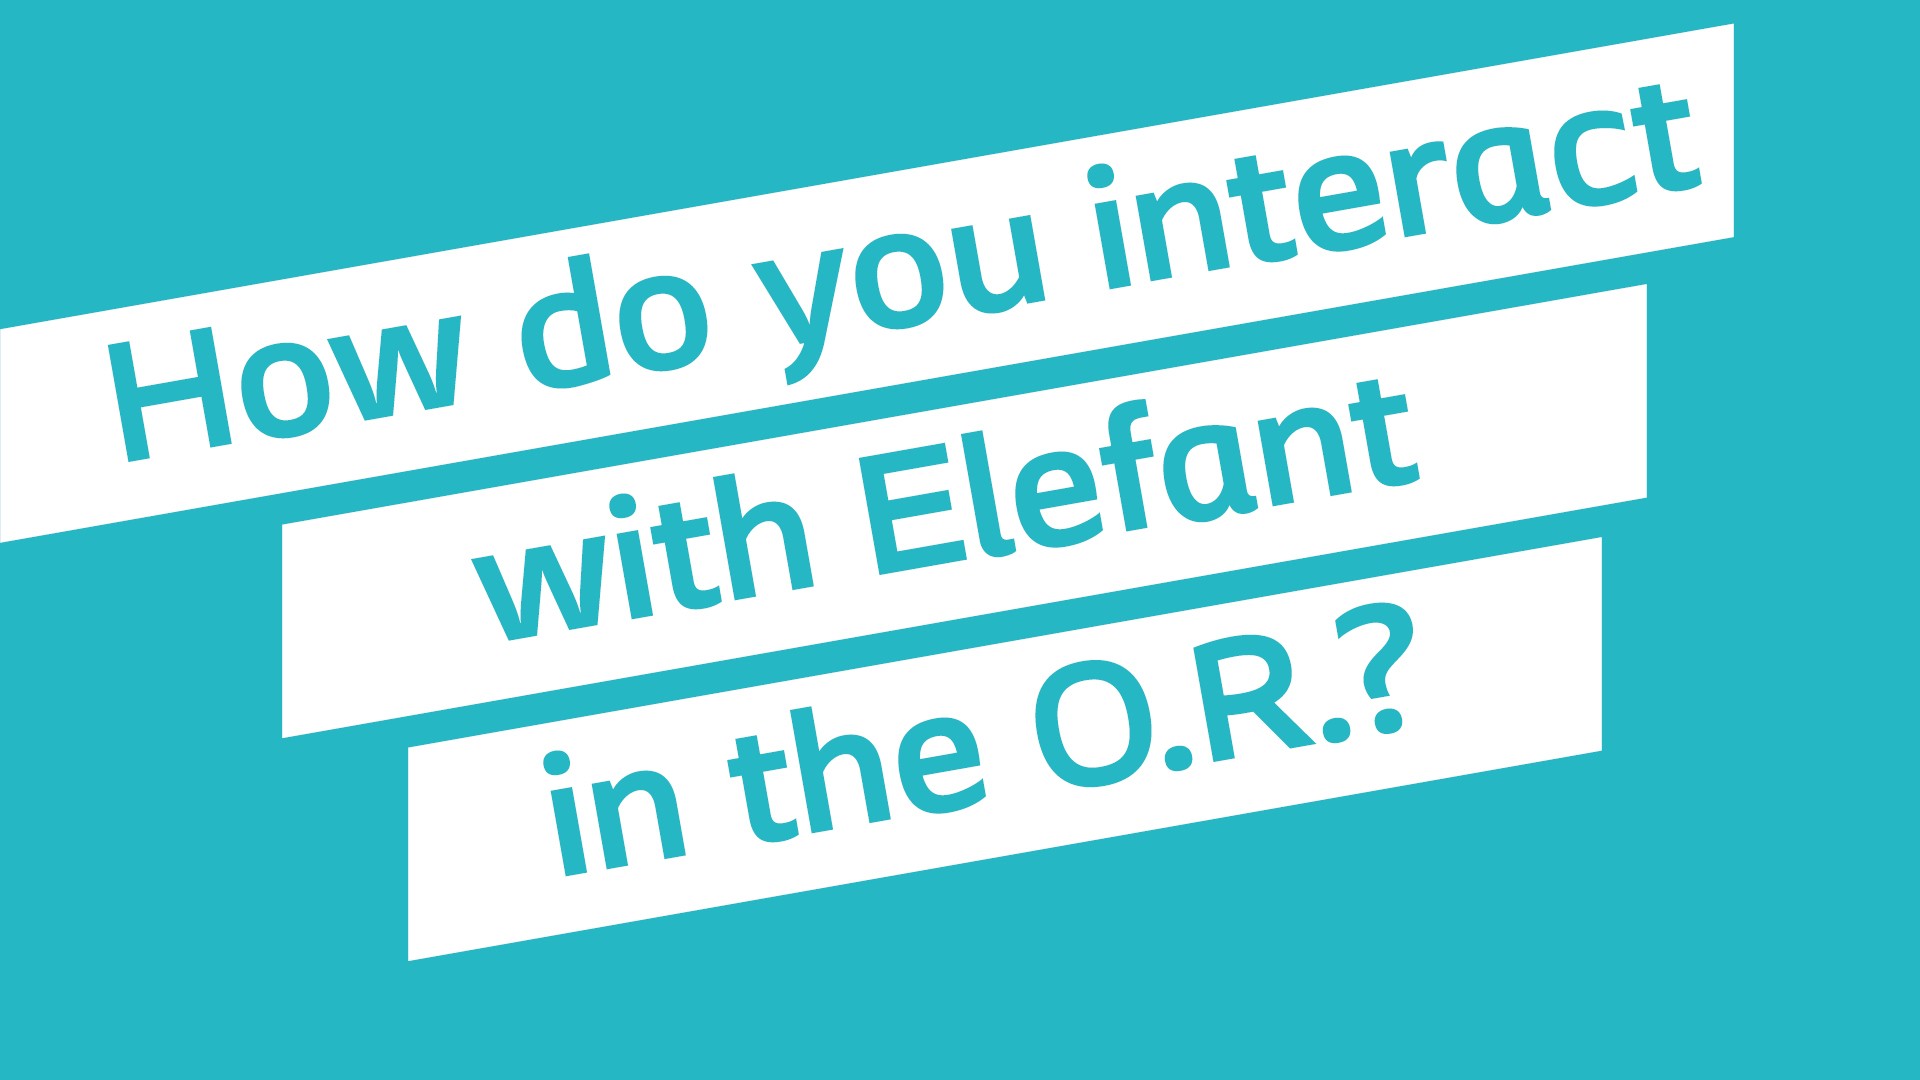 How do you interact with Elefant in the O.R? Elefant by Coloplast